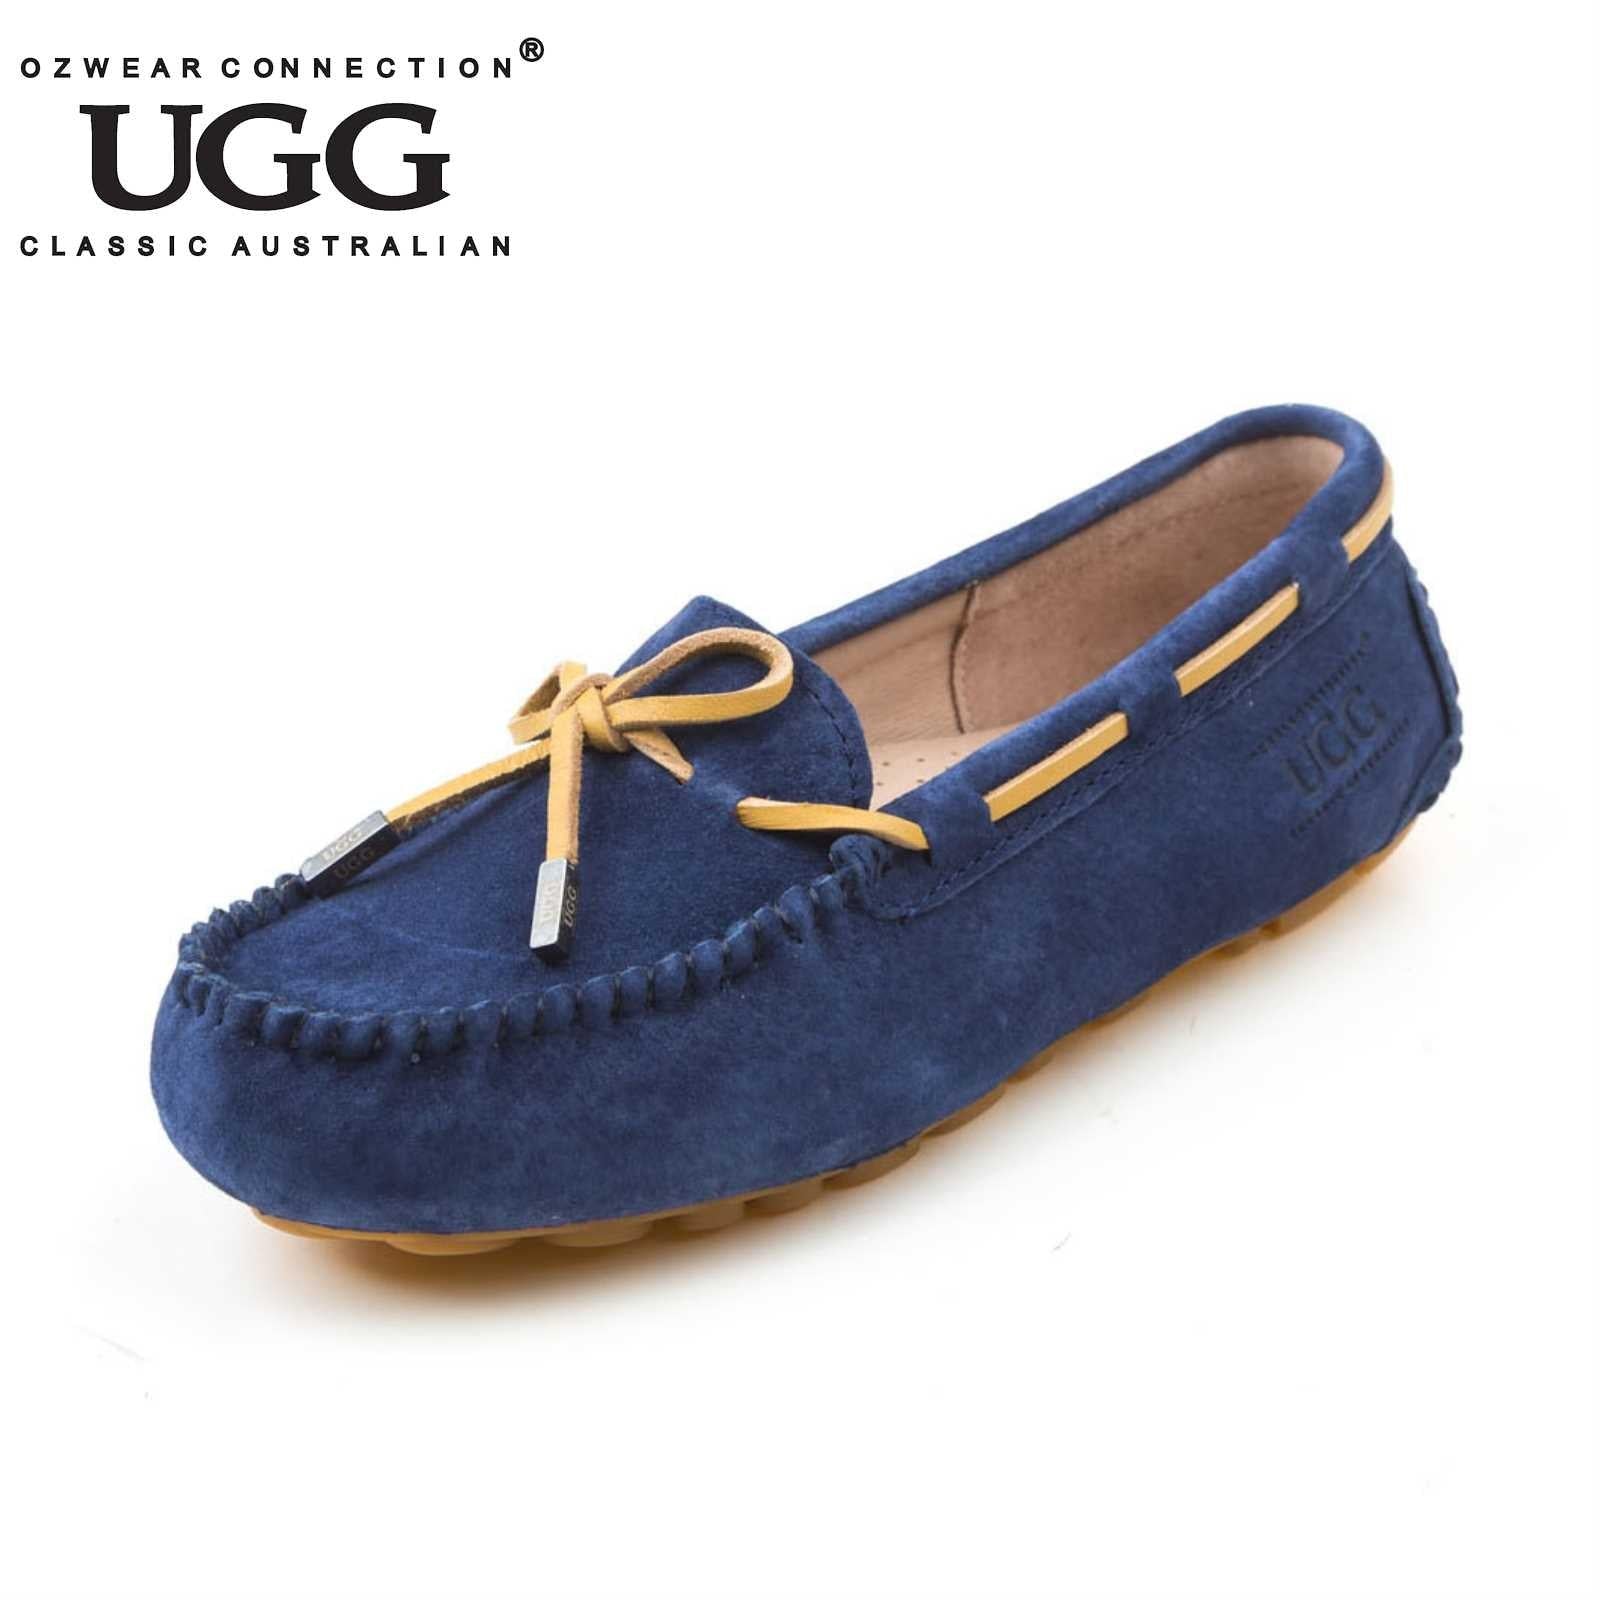 UGG OZWEAR Aven Lace Summer & Spring Moccasin Water Resistant Flat Shoes OB150II - Super Buyer